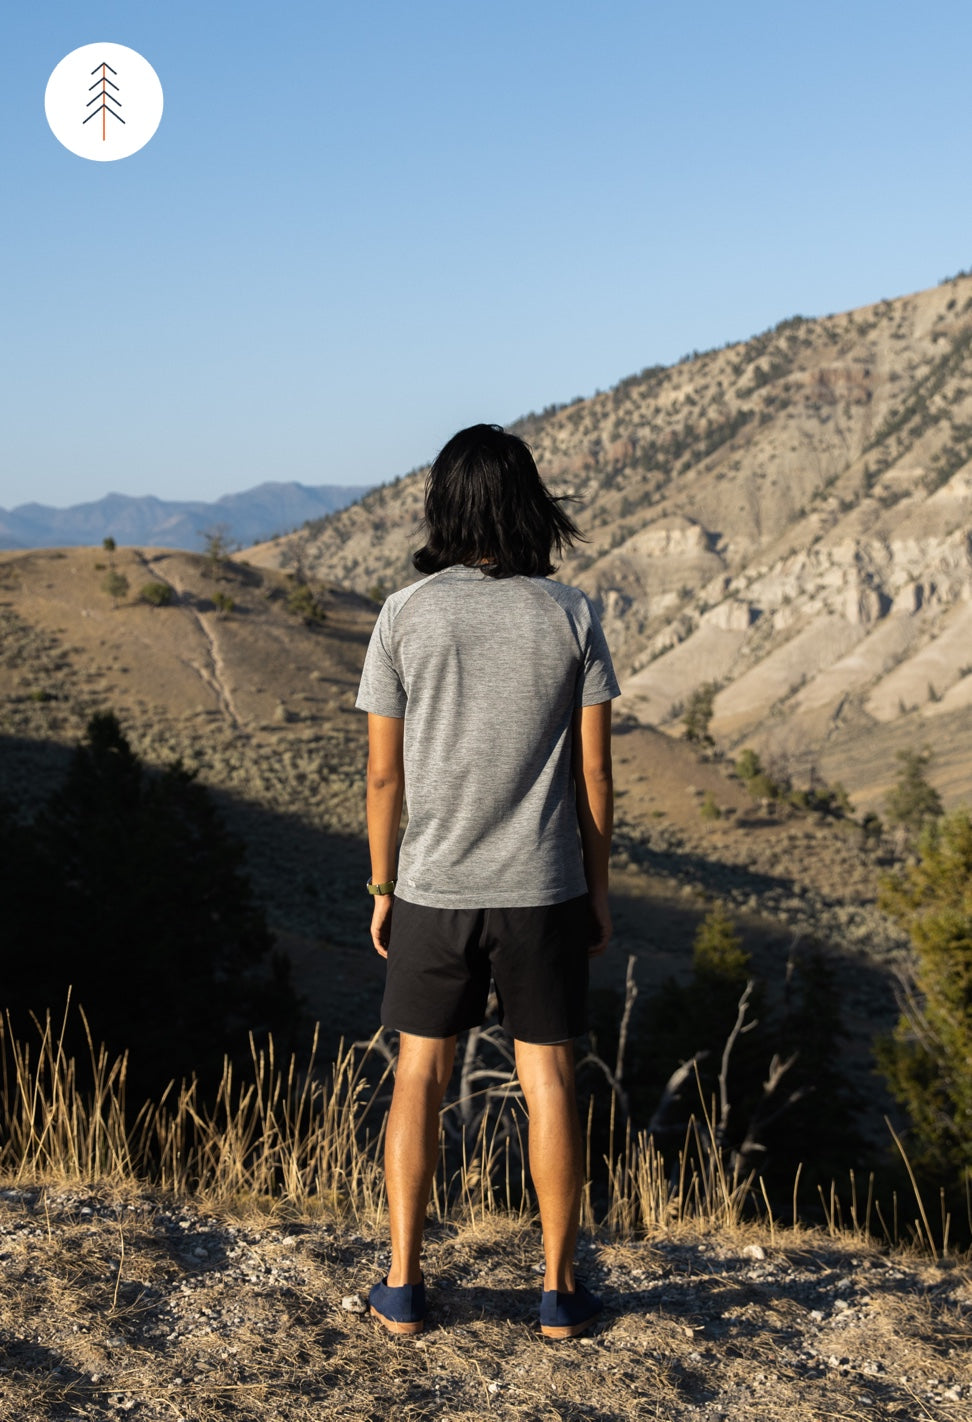 Image of person wearing SUAVS Zilker sneakers, staring into horizon in nature.